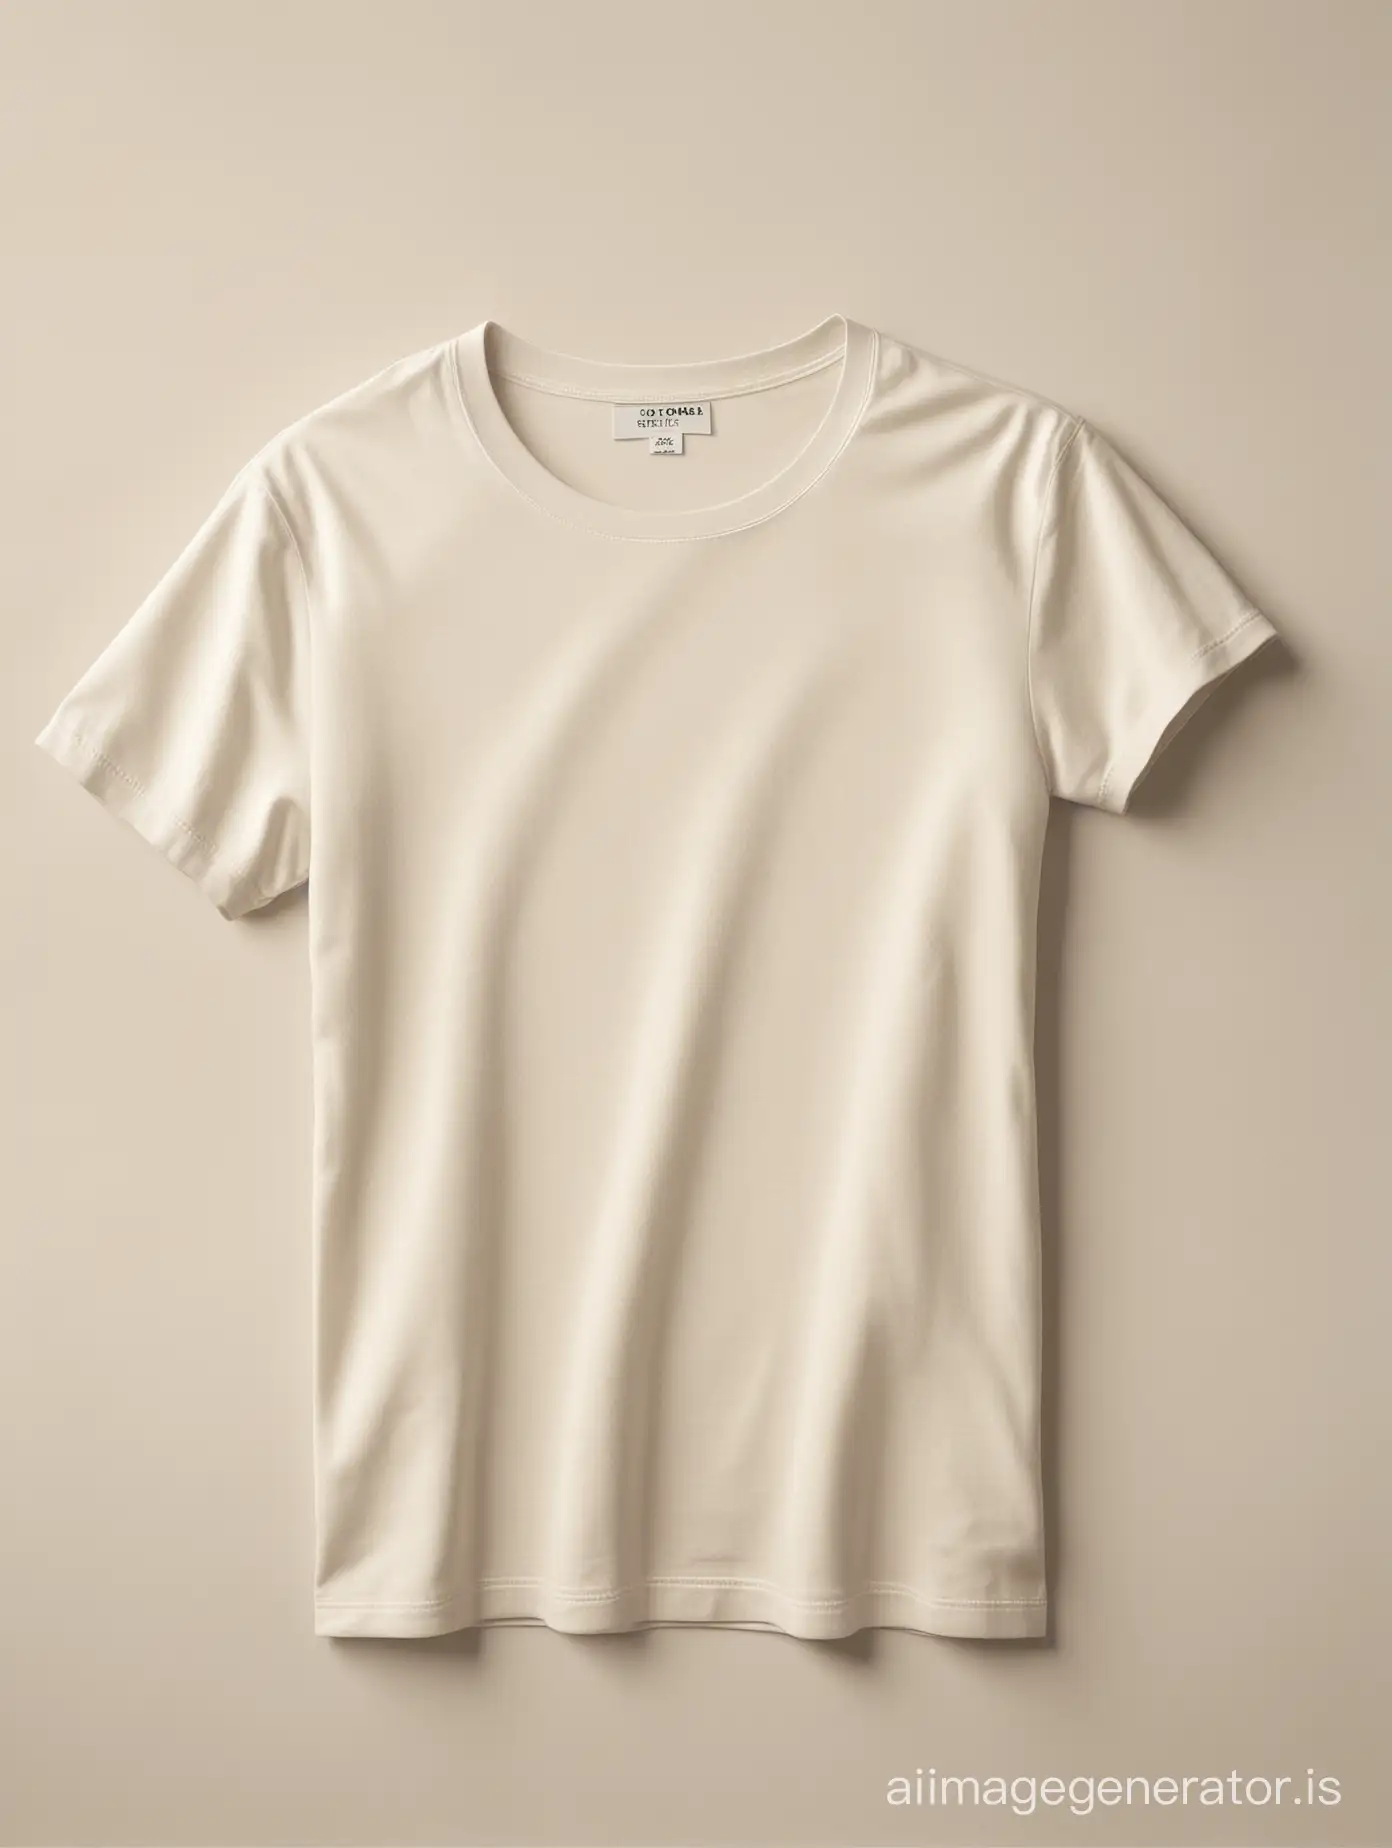 Super-realistic high resolution studio photo of a highly detailed cotton t shirt  in a rich, ivory color with a white label. Natural daylight streams in from the side, casting soft shadows that highlight the cotton texture of the cotton. Background is a seamless white paper with a subtle texture, creating a clean, luxurious feel. Overall aesthetic is high-end, minimalist, and inviting, reminiscent of a Zara brand catalog.